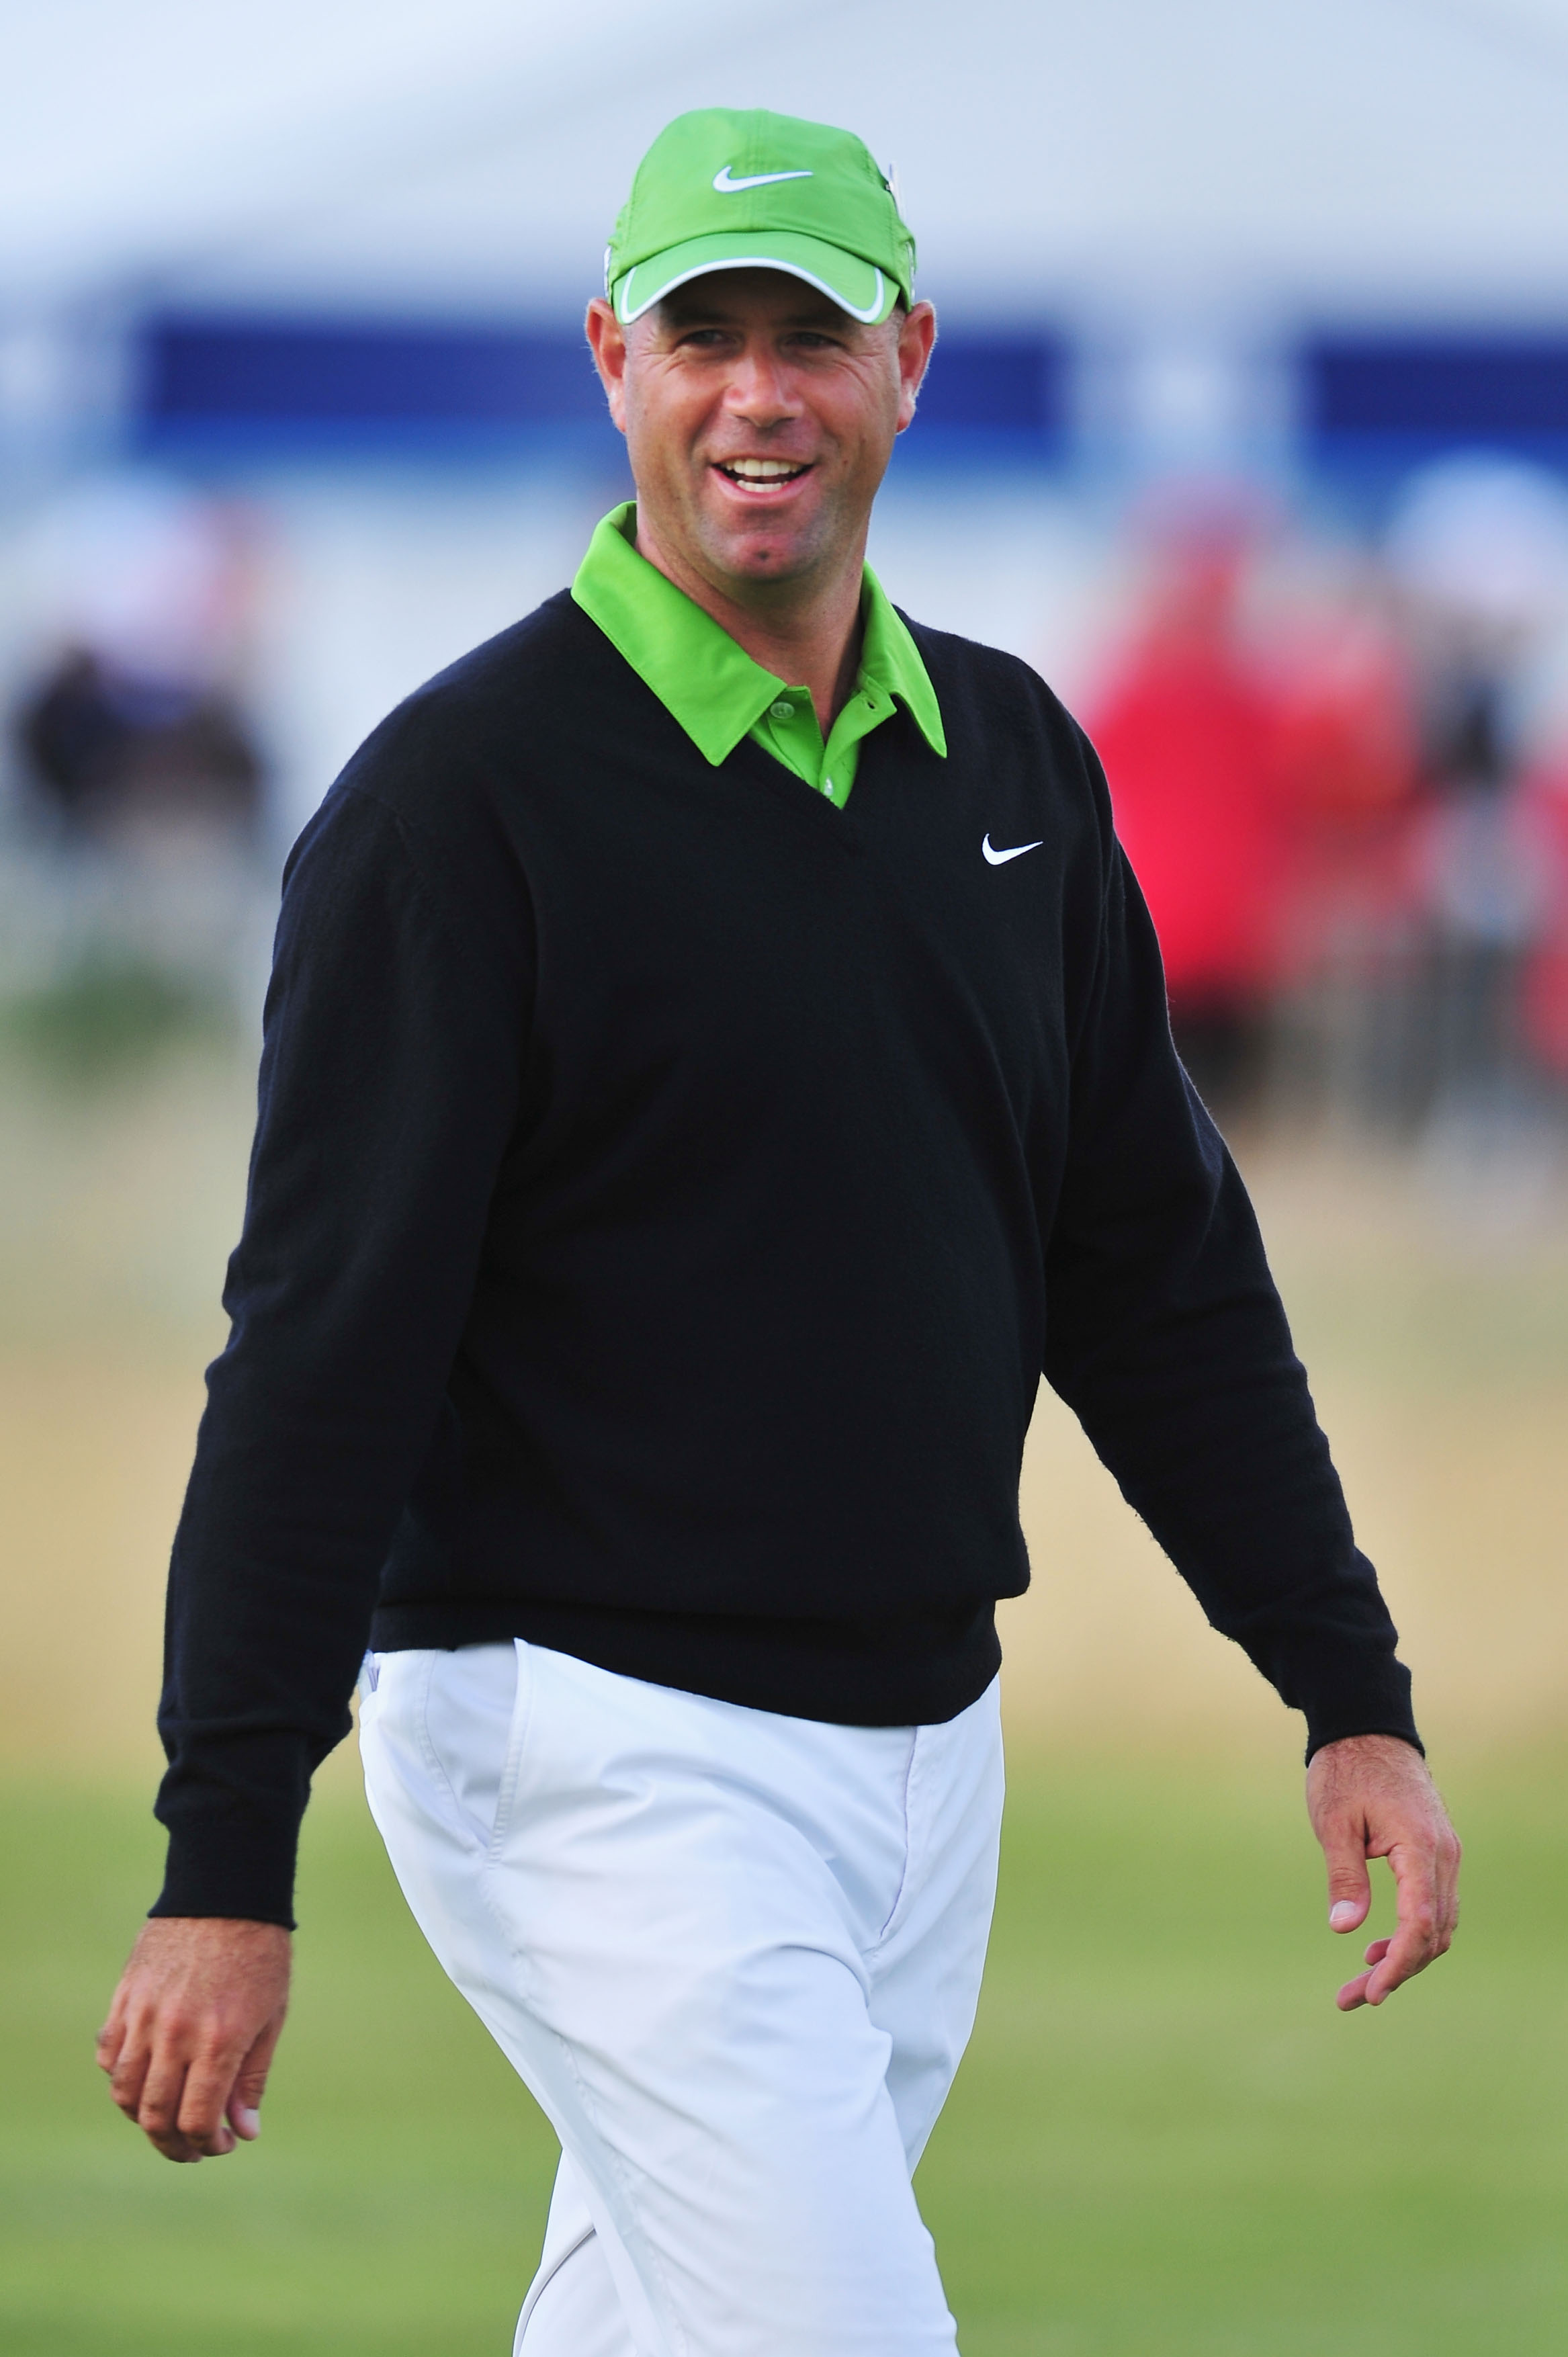 TURNBERRY, SCOTLAND - JULY 19:  Stewart Cink of USA smiles after hitting his approach shot on the final playoff hole with Tom Watson after the final round of the 138th Open Championship on the Ailsa Course, Turnberry Golf Club on July 19, 2009 in Turnberr